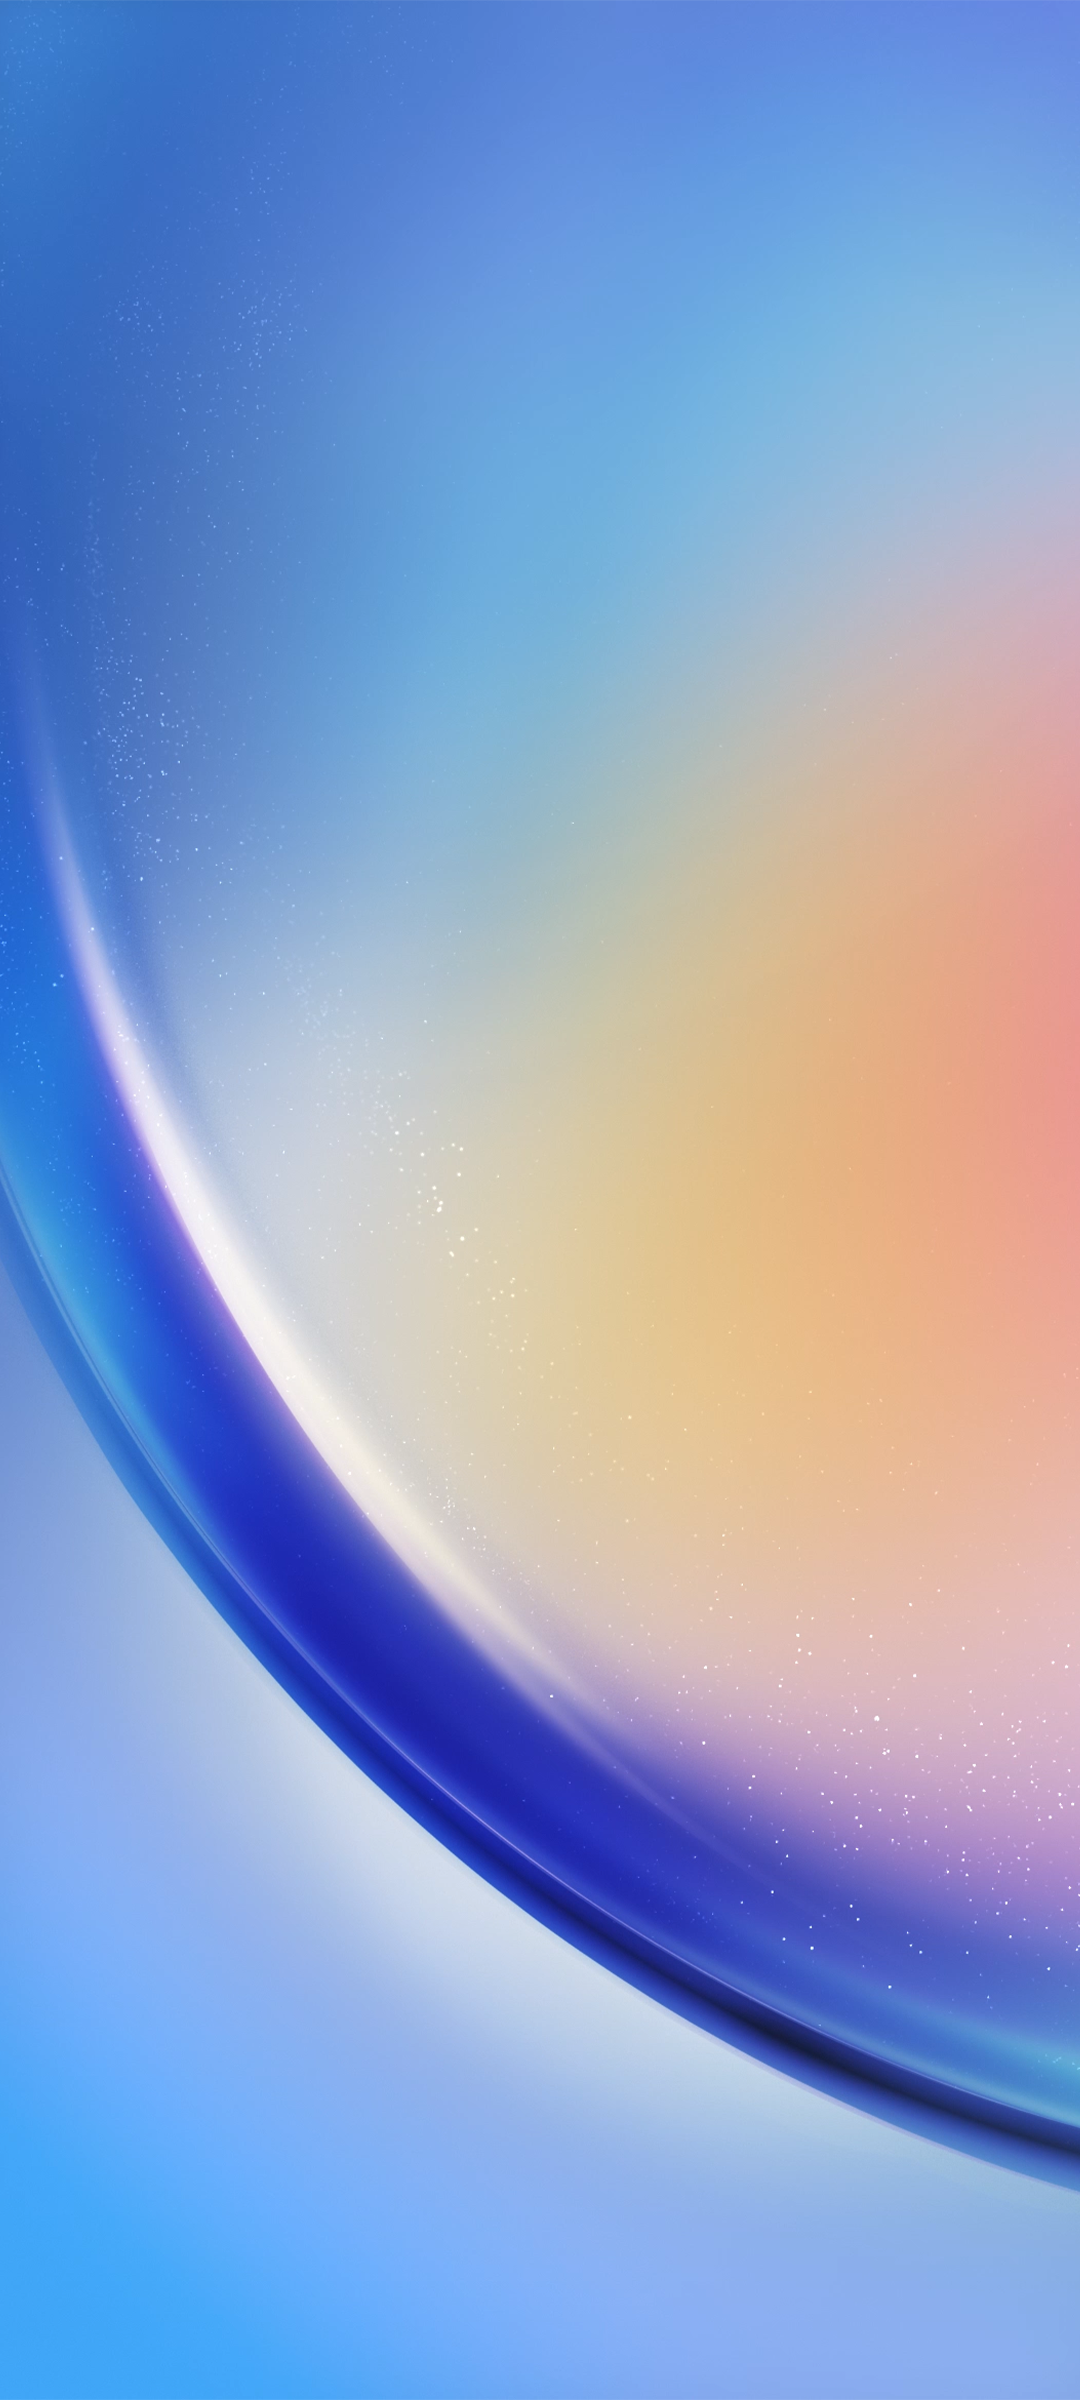 Samsung Galaxy S6 And S6 Edge Default Wallpapers Leak Before Release   LaptrinhX